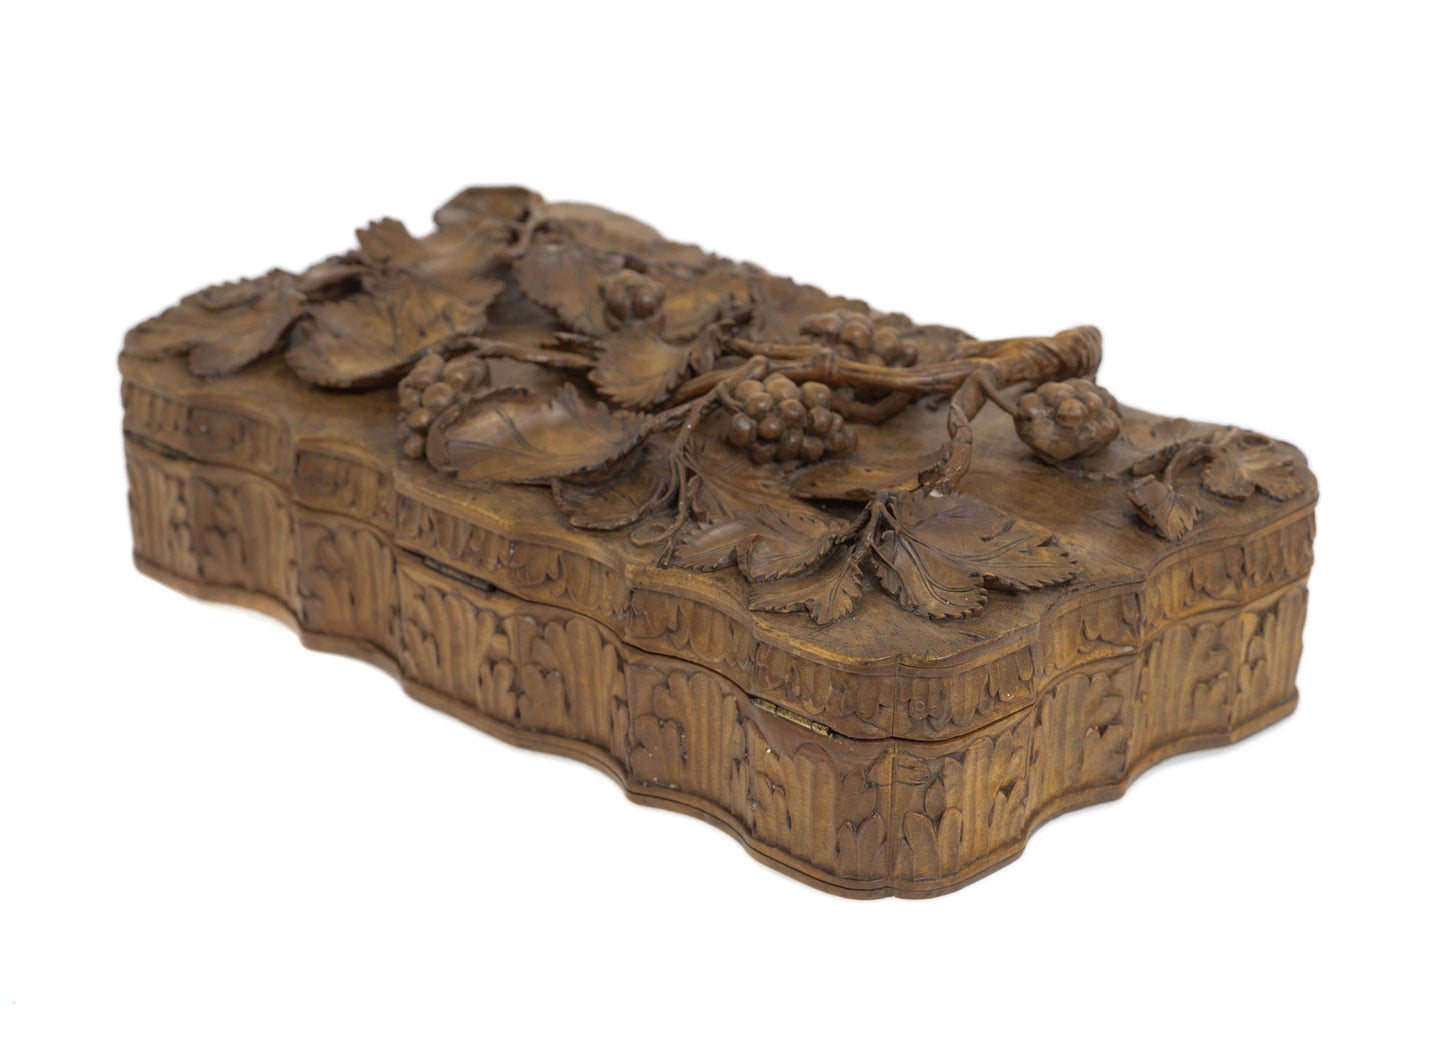 Antique European Alto Relievo Carved Softwood Box - Vines & Grapes - Swiss c1900 (Code 2852)